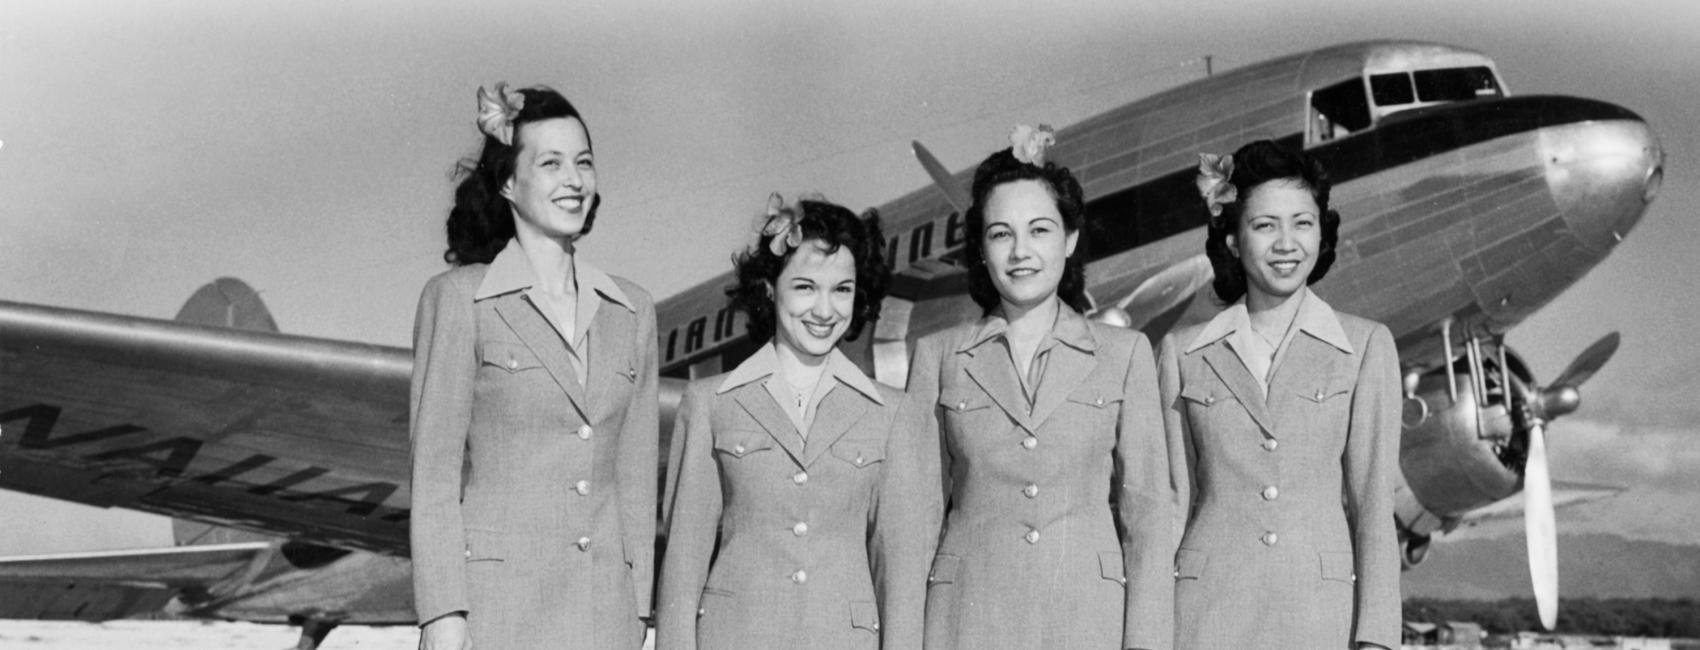 Now and Then - A Brief History of Flight Attendants